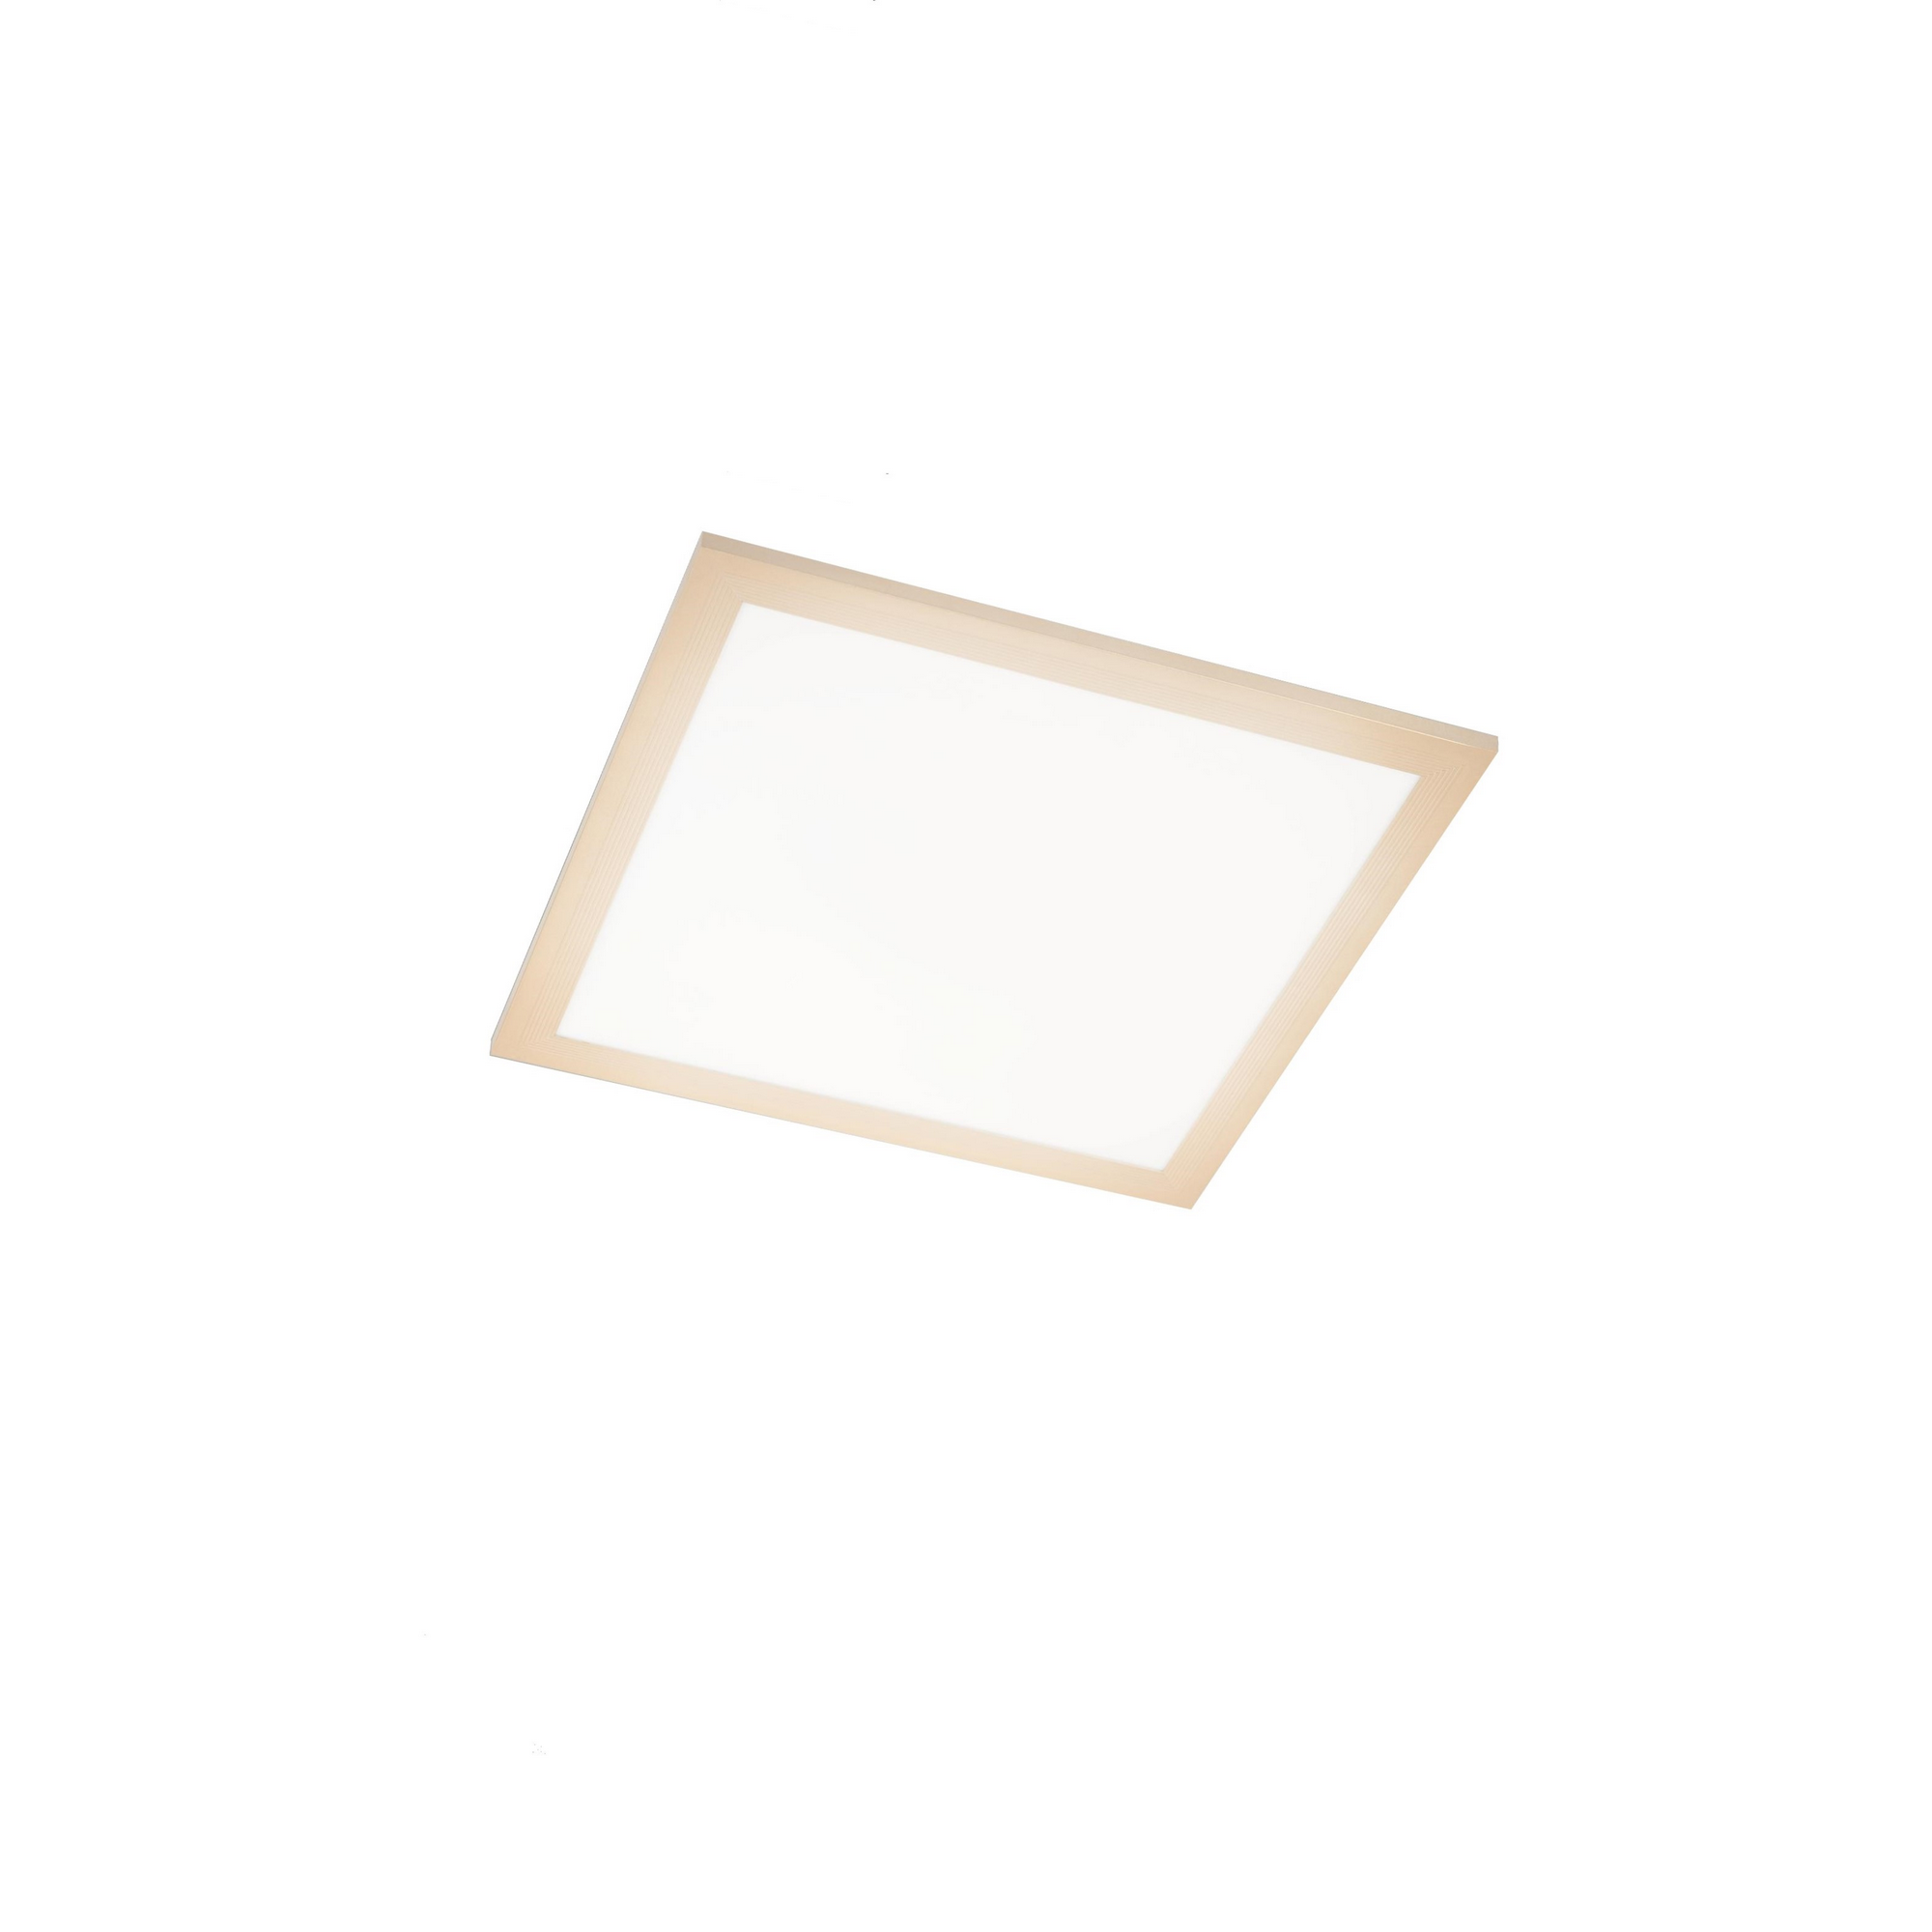 LED-Panel goldfarben 45 x 45 x 6 cm + product picture